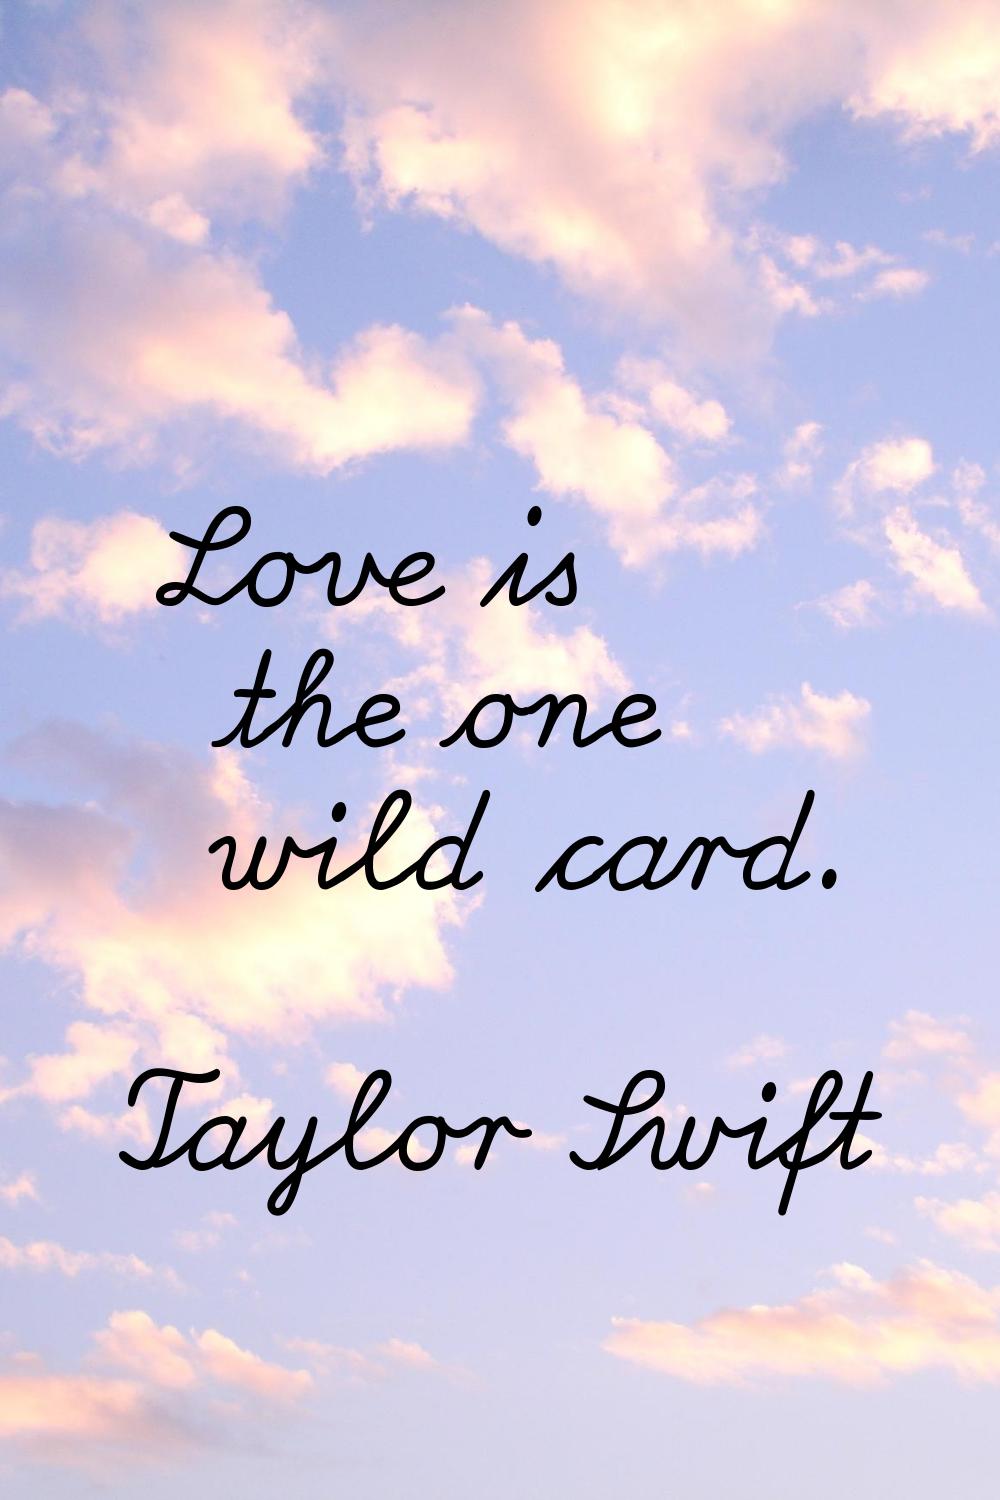 Love is the one wild card.